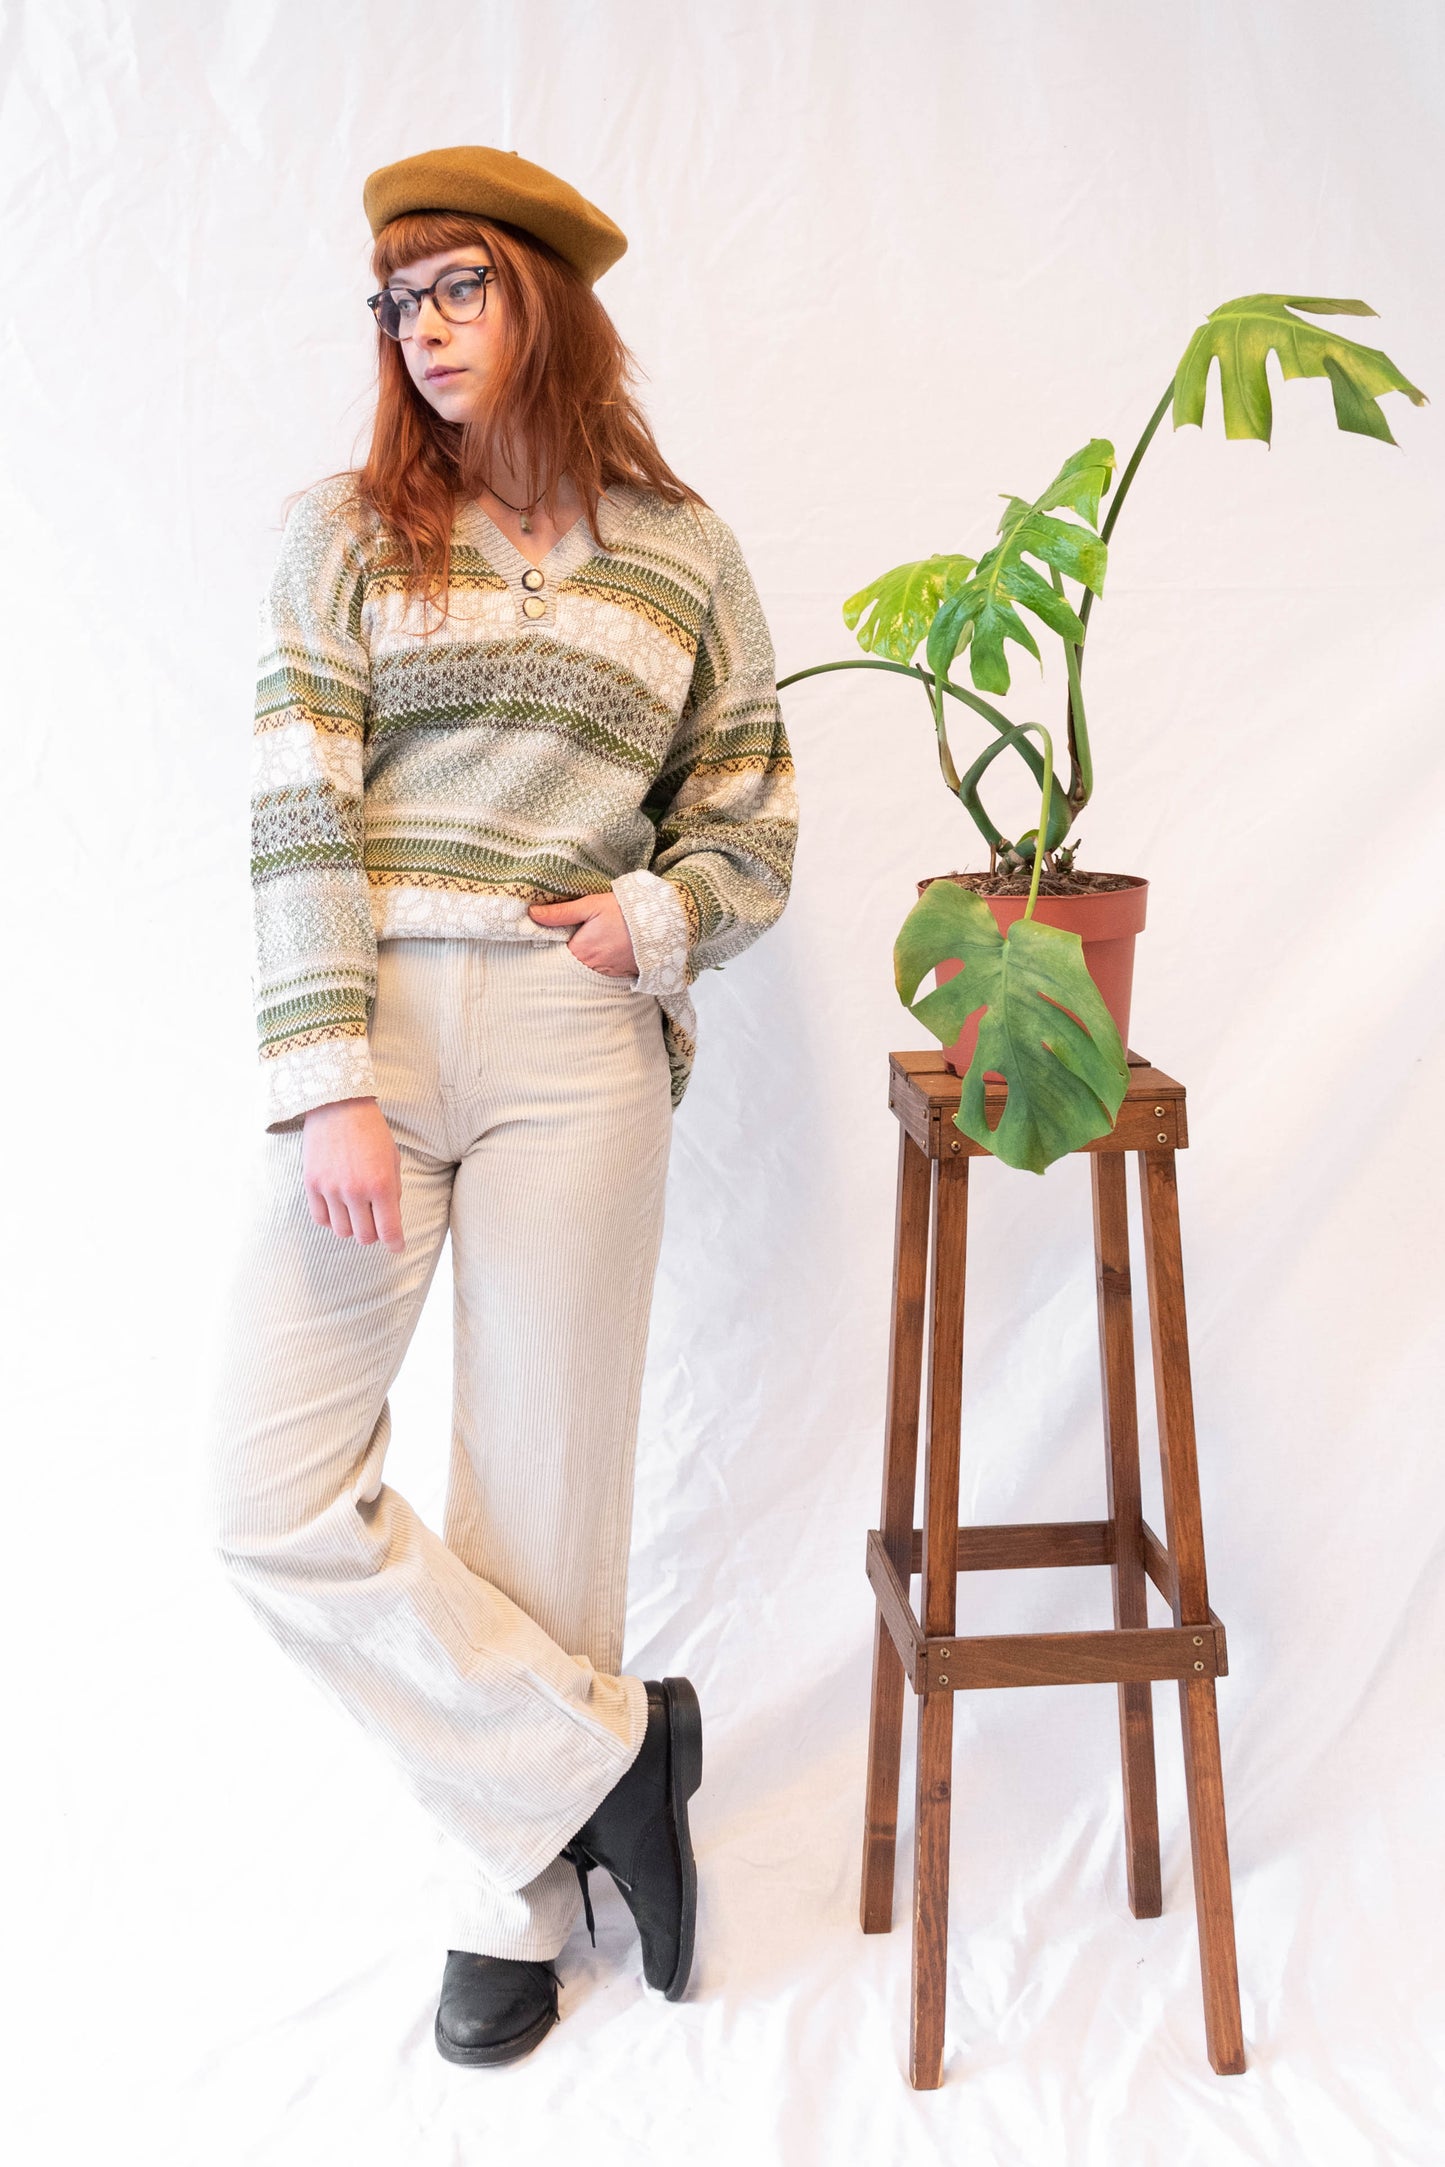 NEW IN! Vintage sweater